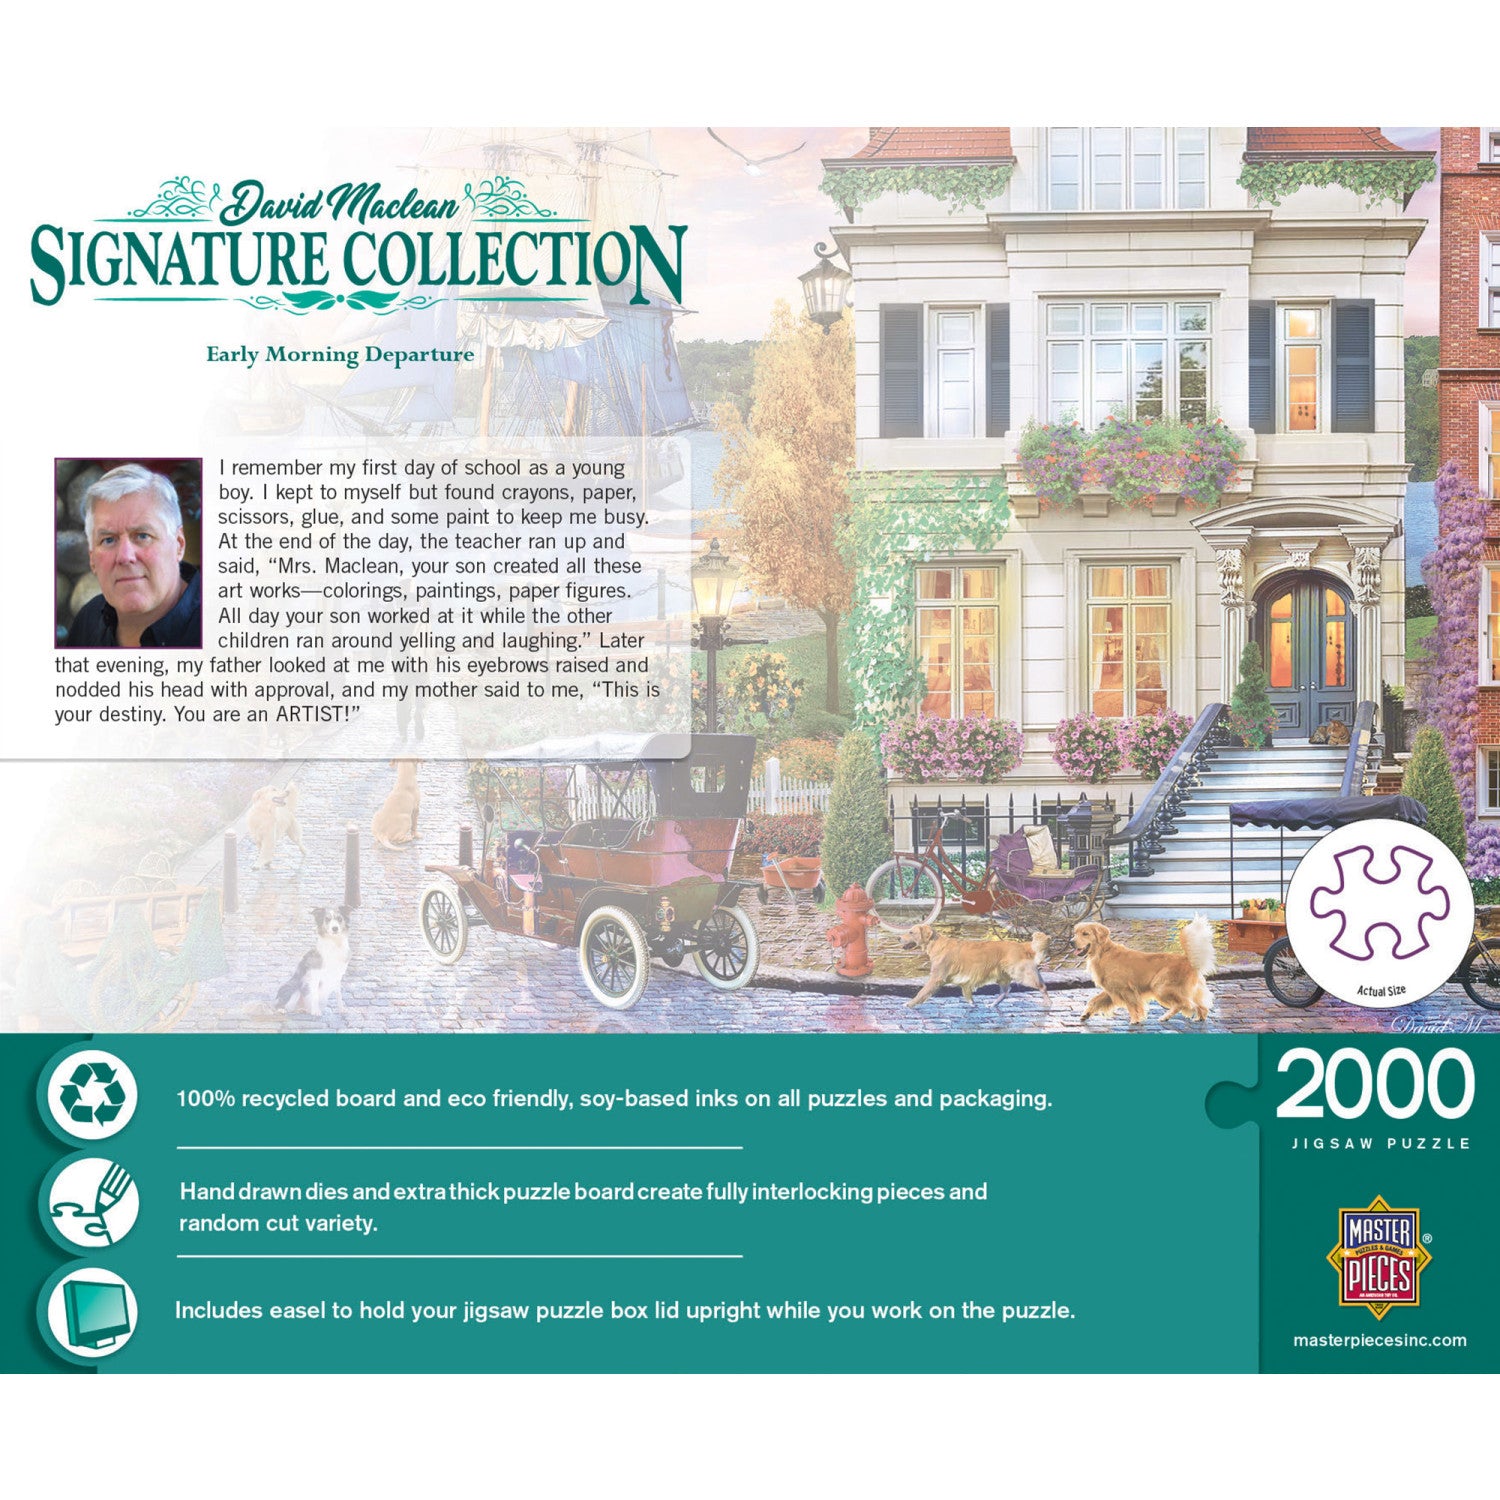 Signature Collection - Early Morning Departure 2000 Piece Jigsaw Puzzle